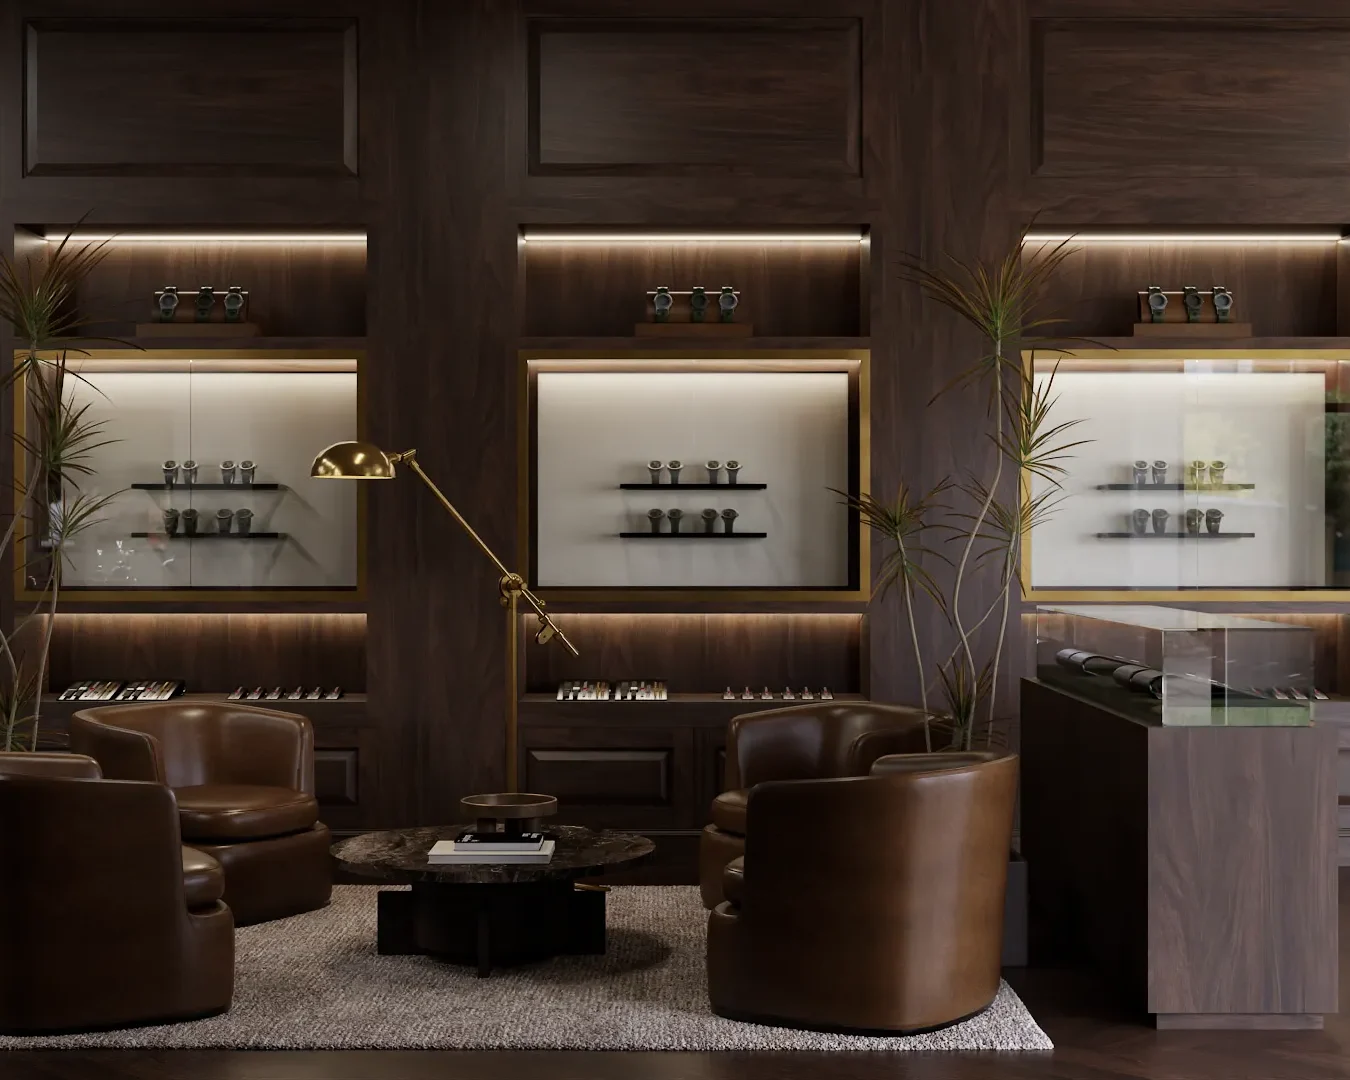 Elegant lounge area with rich wood shelving and leather seating, warmly lit for a cozy ambiance, designed by Debora, an online interior design service based in New York City.